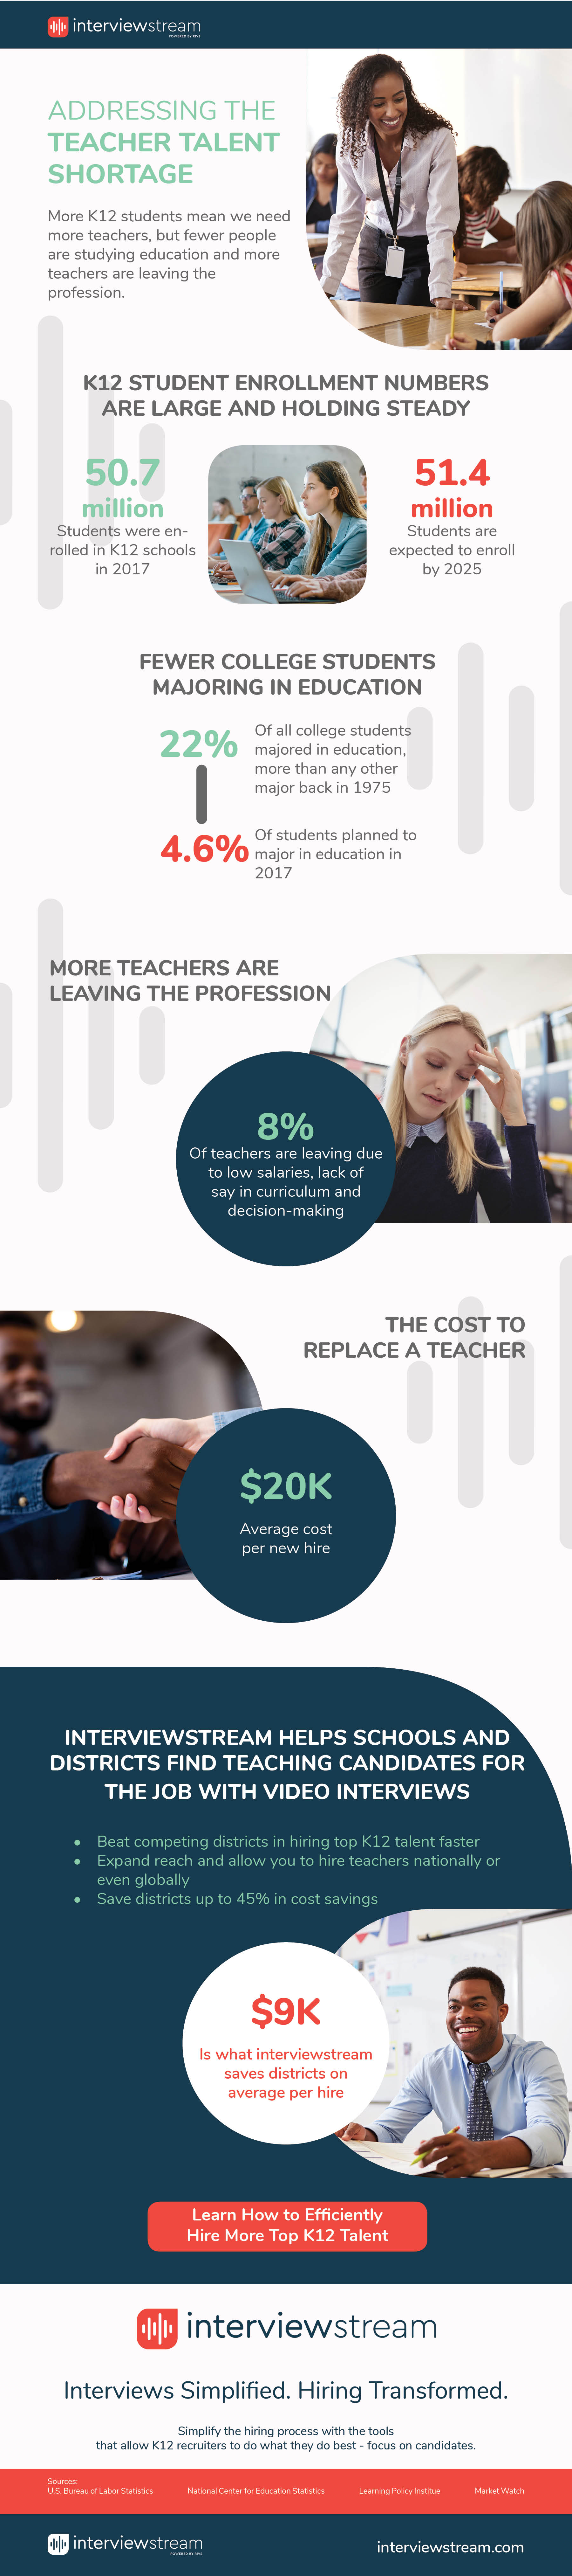 Infographic addressing the teacher shortage in the United States